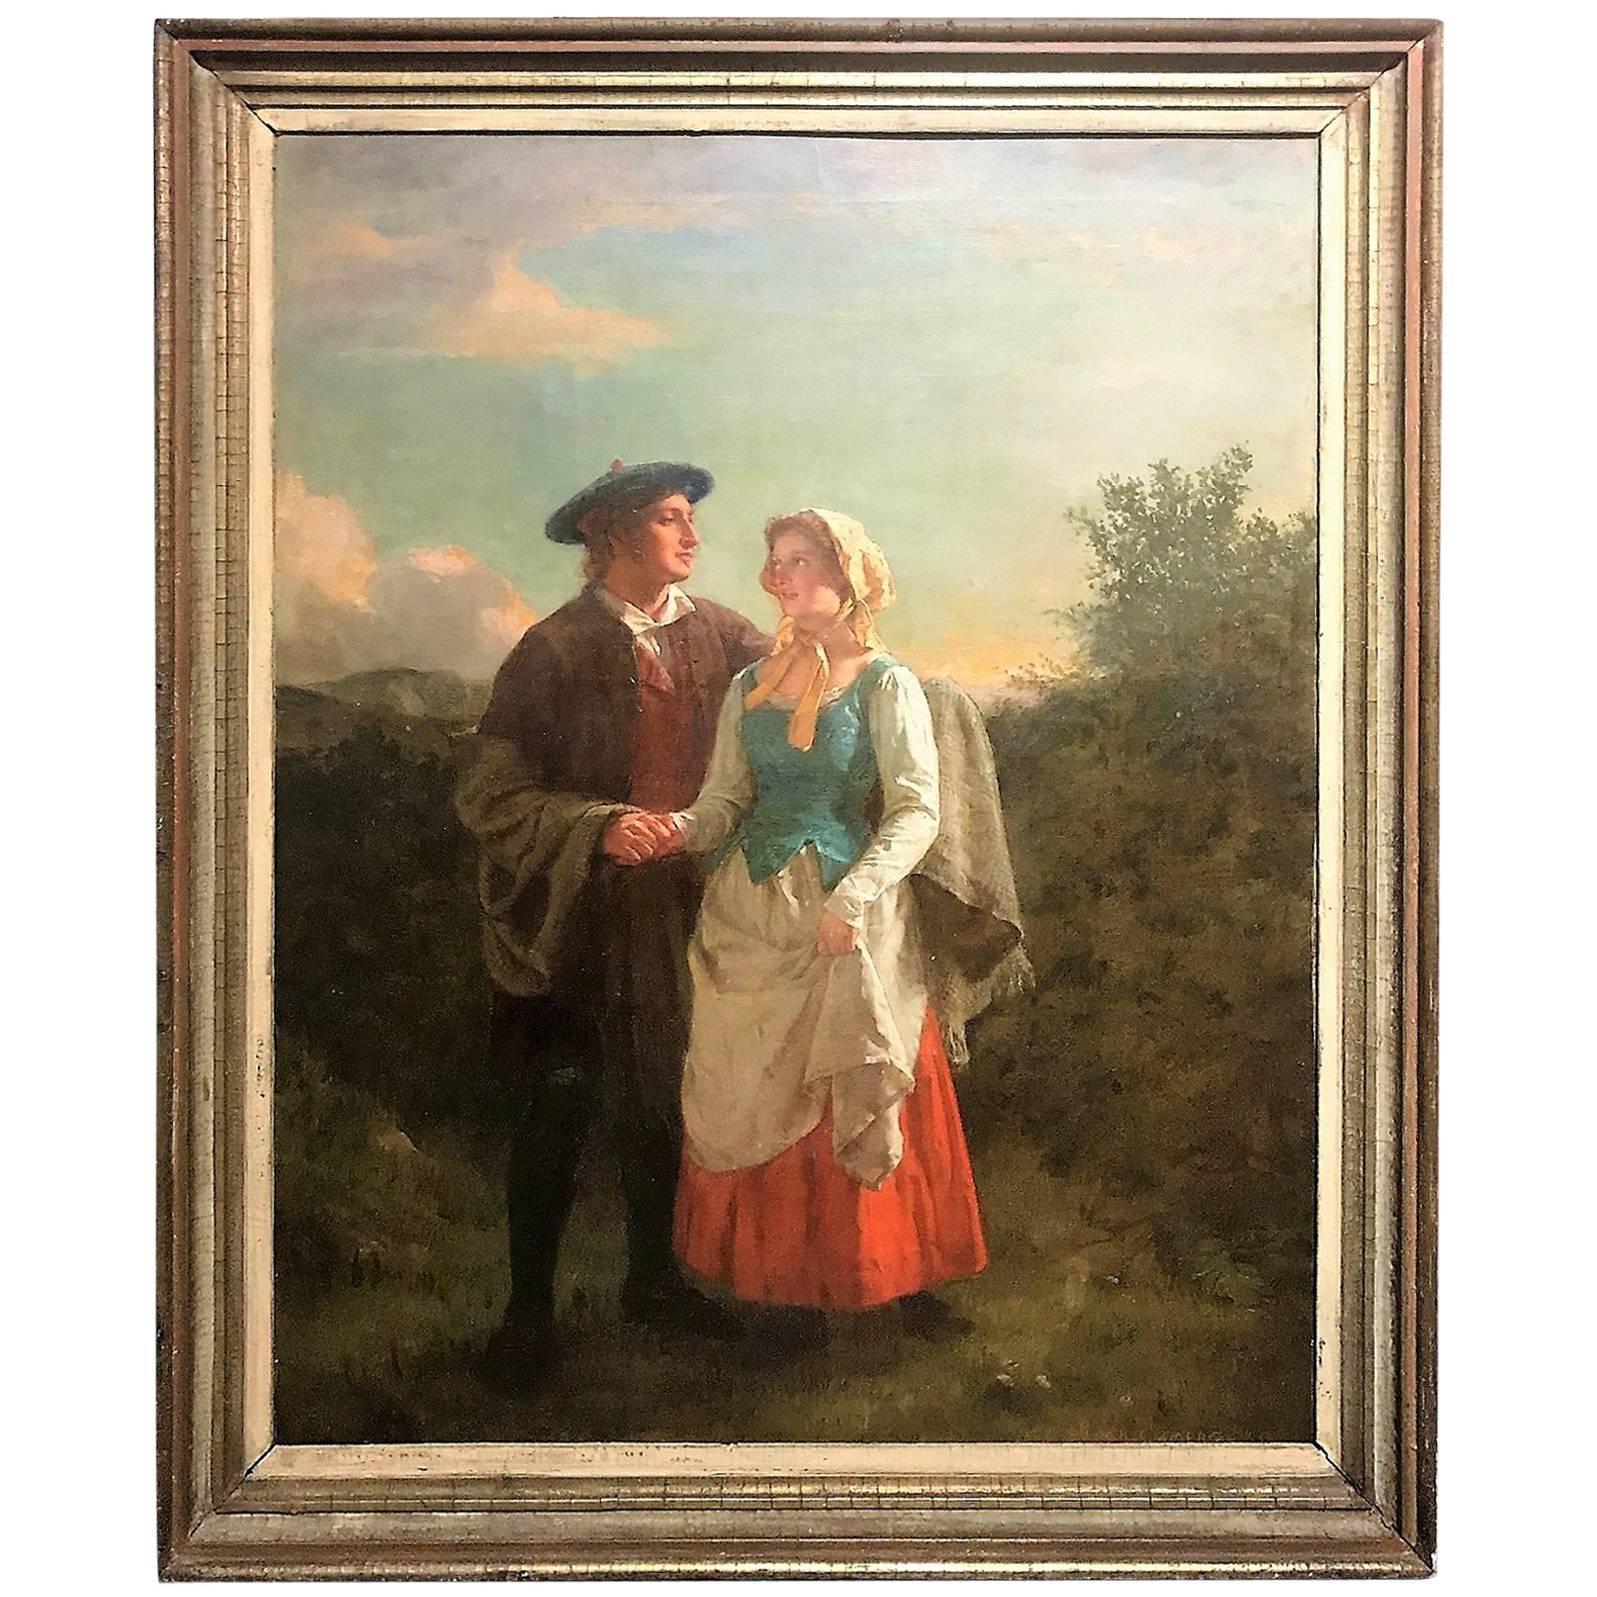 Hugh Cameron, Oil on Canvas Painting, Lad and Lass, circa 1860